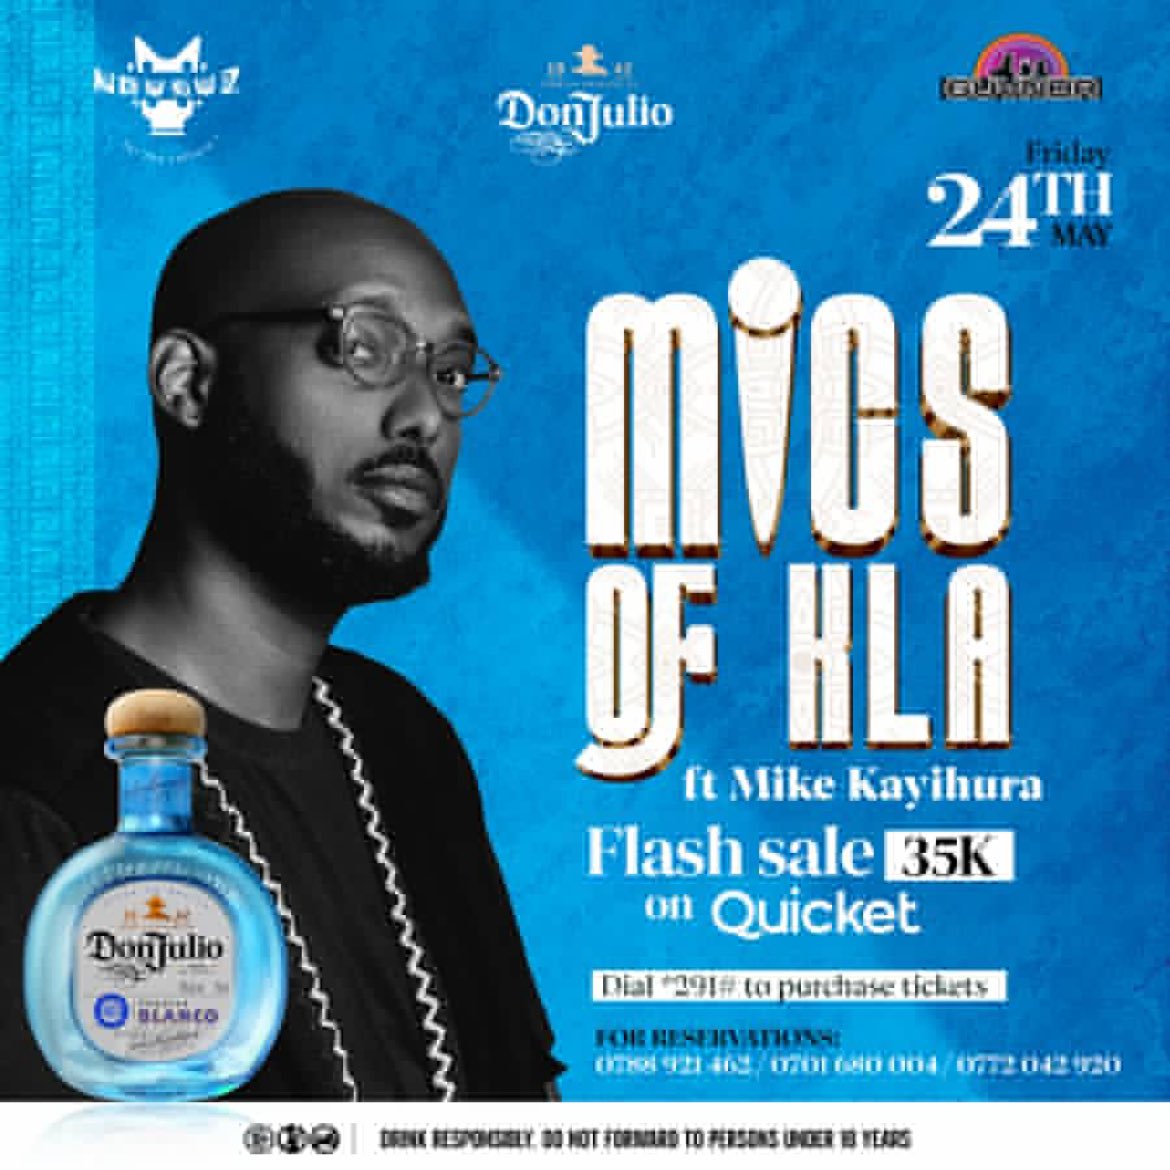 It's finally Friday. How about we go to @GuvnorUganda and relieve all the stress from this week? We're having @MikeKayihura and #MicsOfKla. #MikeInGuvnor.